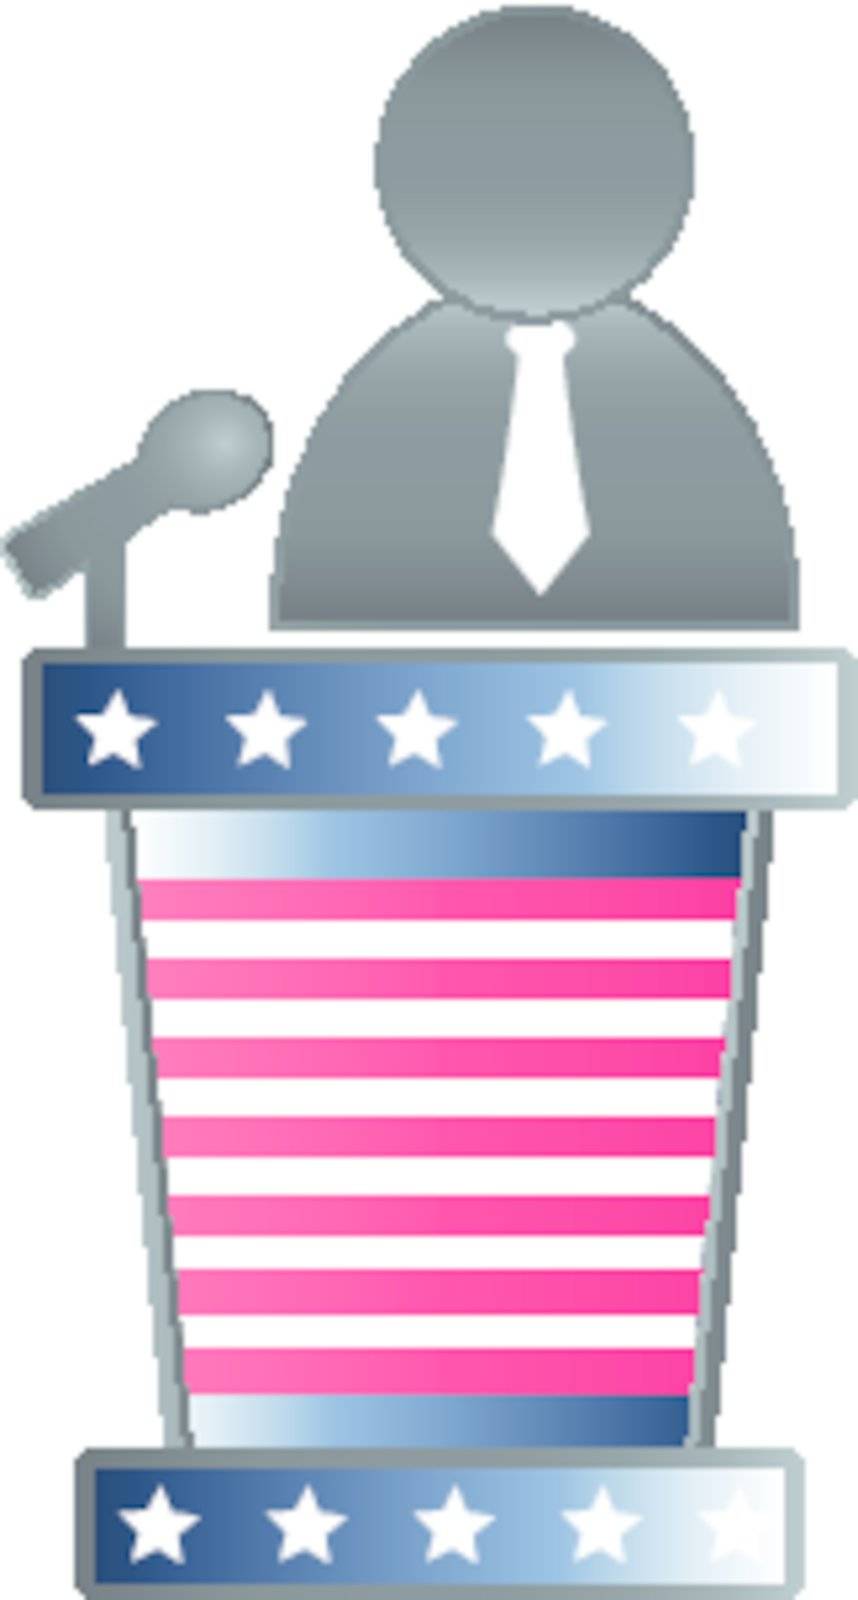 Digitally generated image of a public speaker and on a podium with stars and stripes.